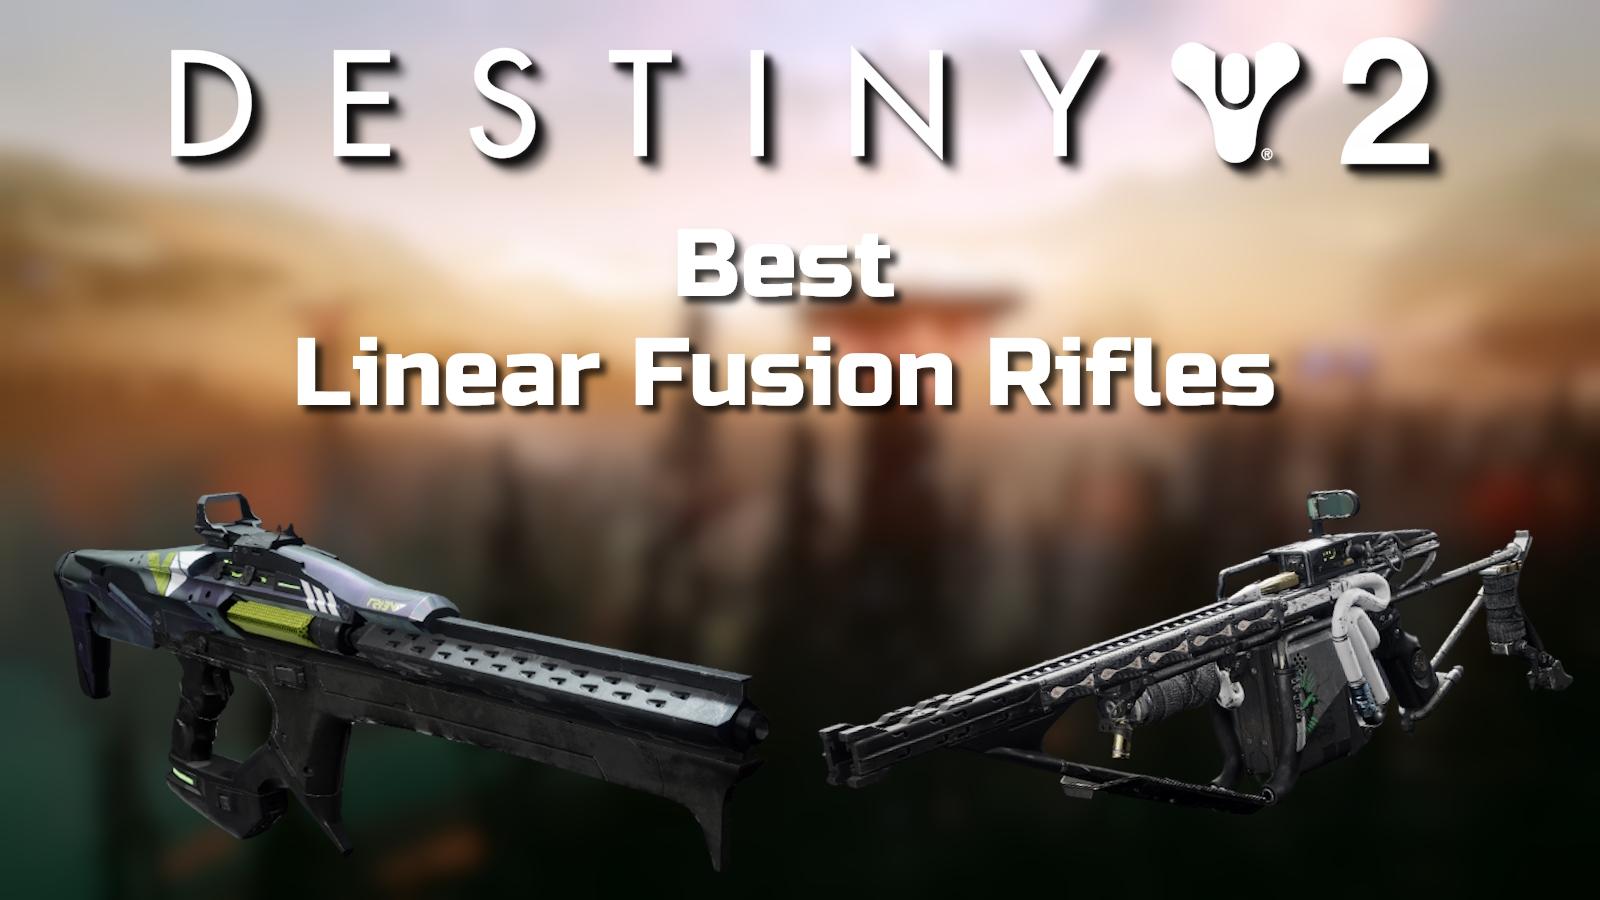 The best Linear Fusion Rifles in Destiny 2 PvE with Taipan-4fr and Arbalest.